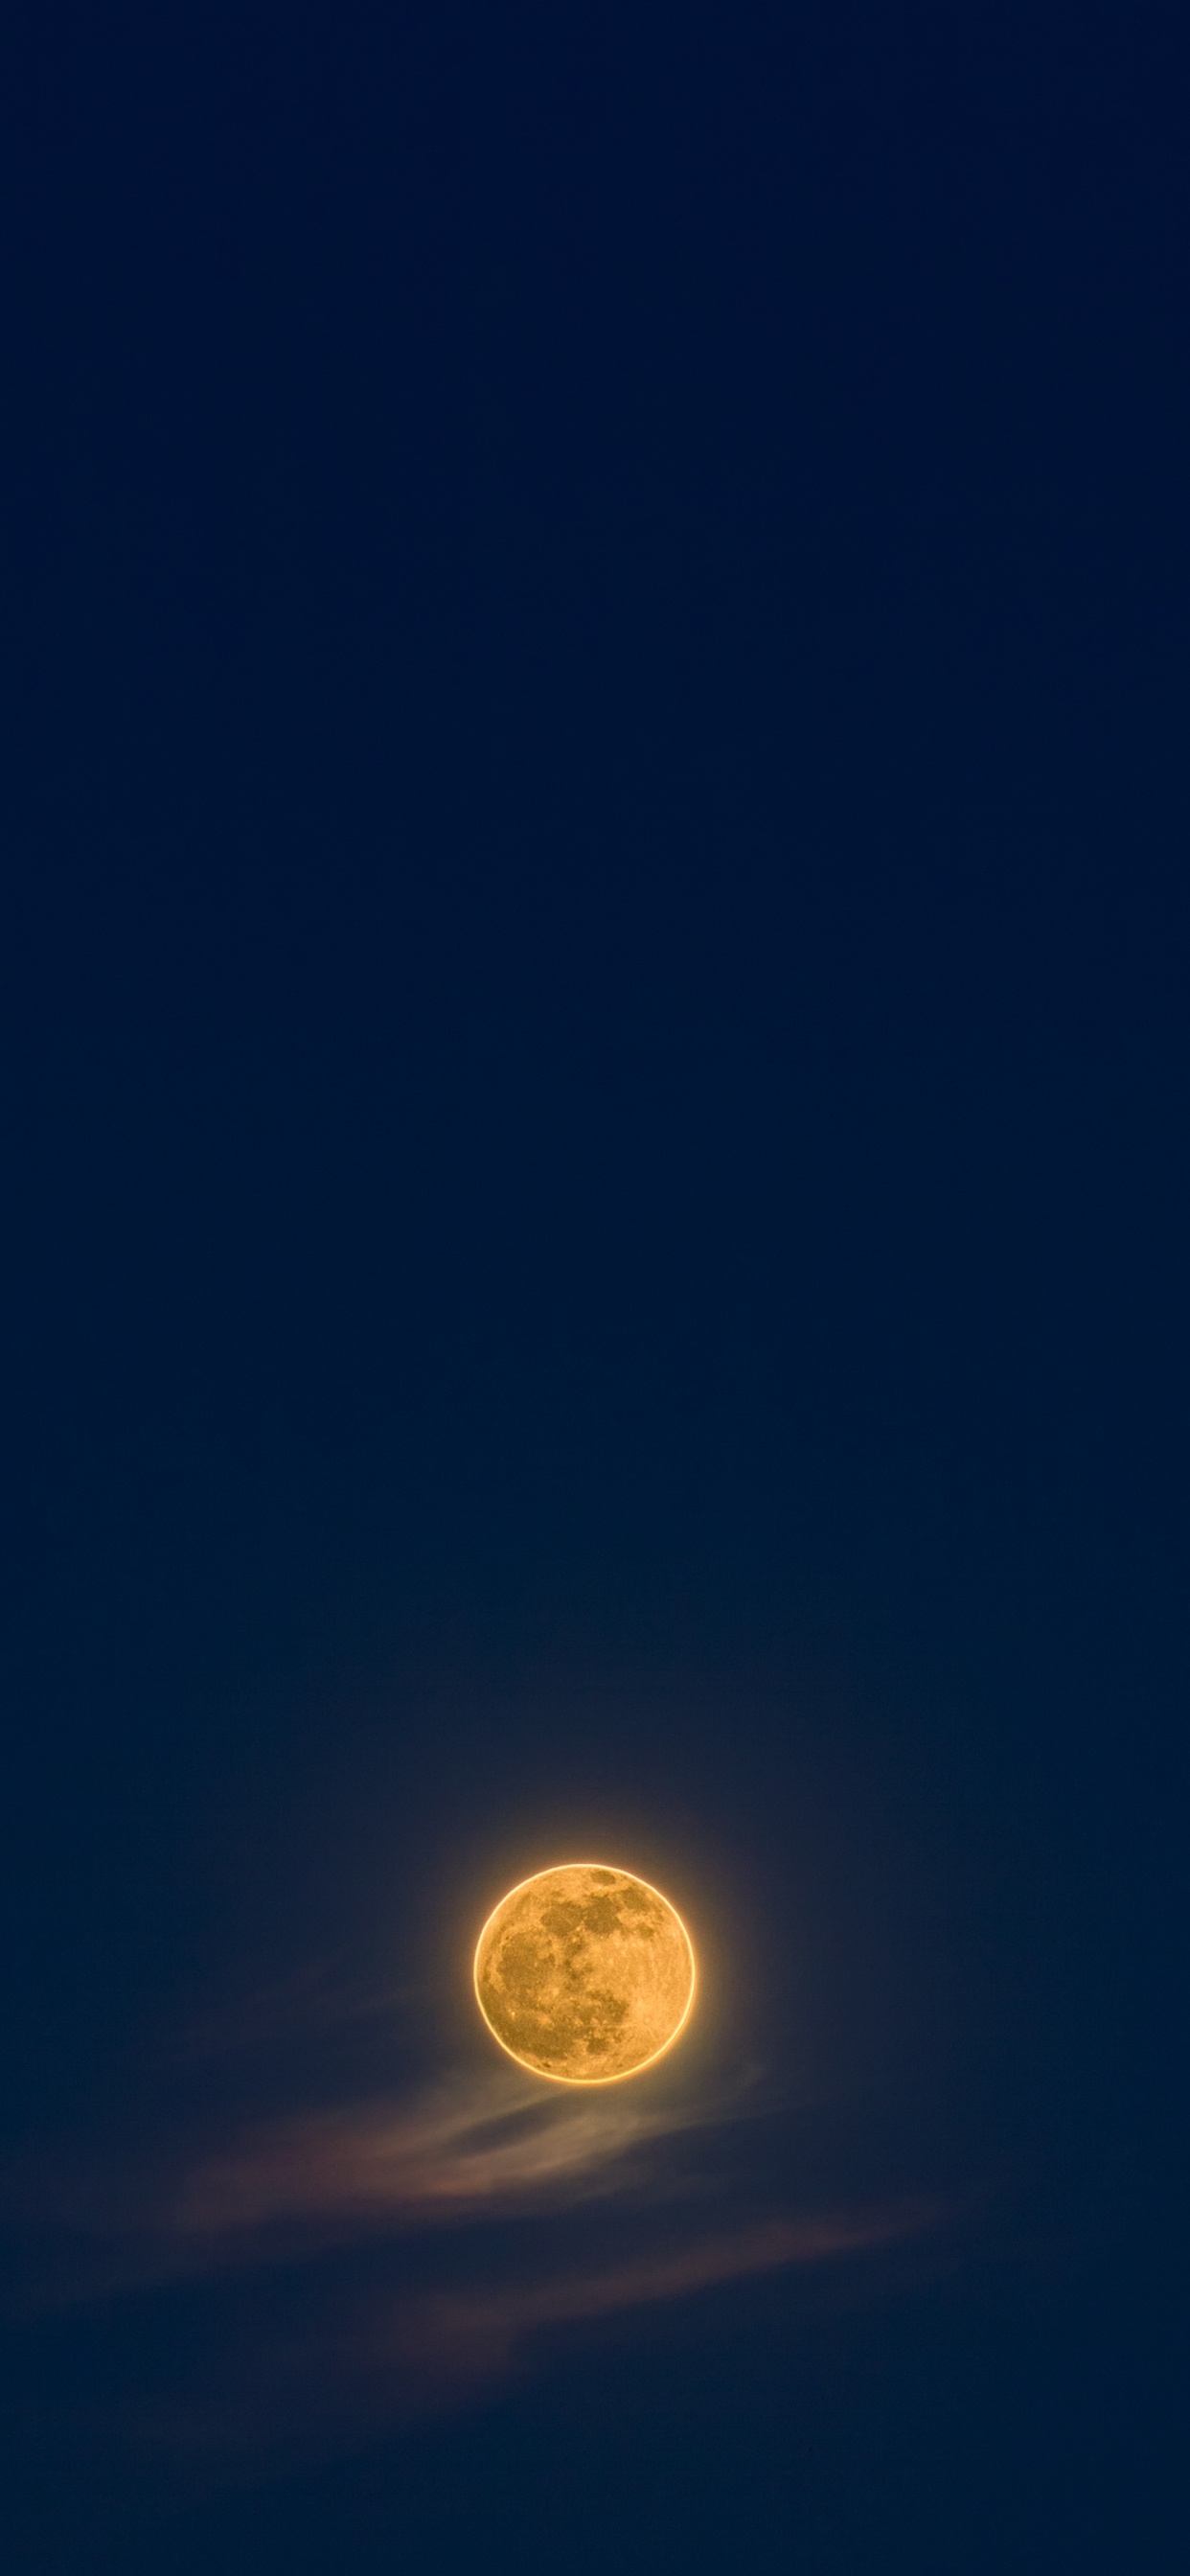 Full Moon in The Sky. Wallpaper in 1242x2688 Resolution